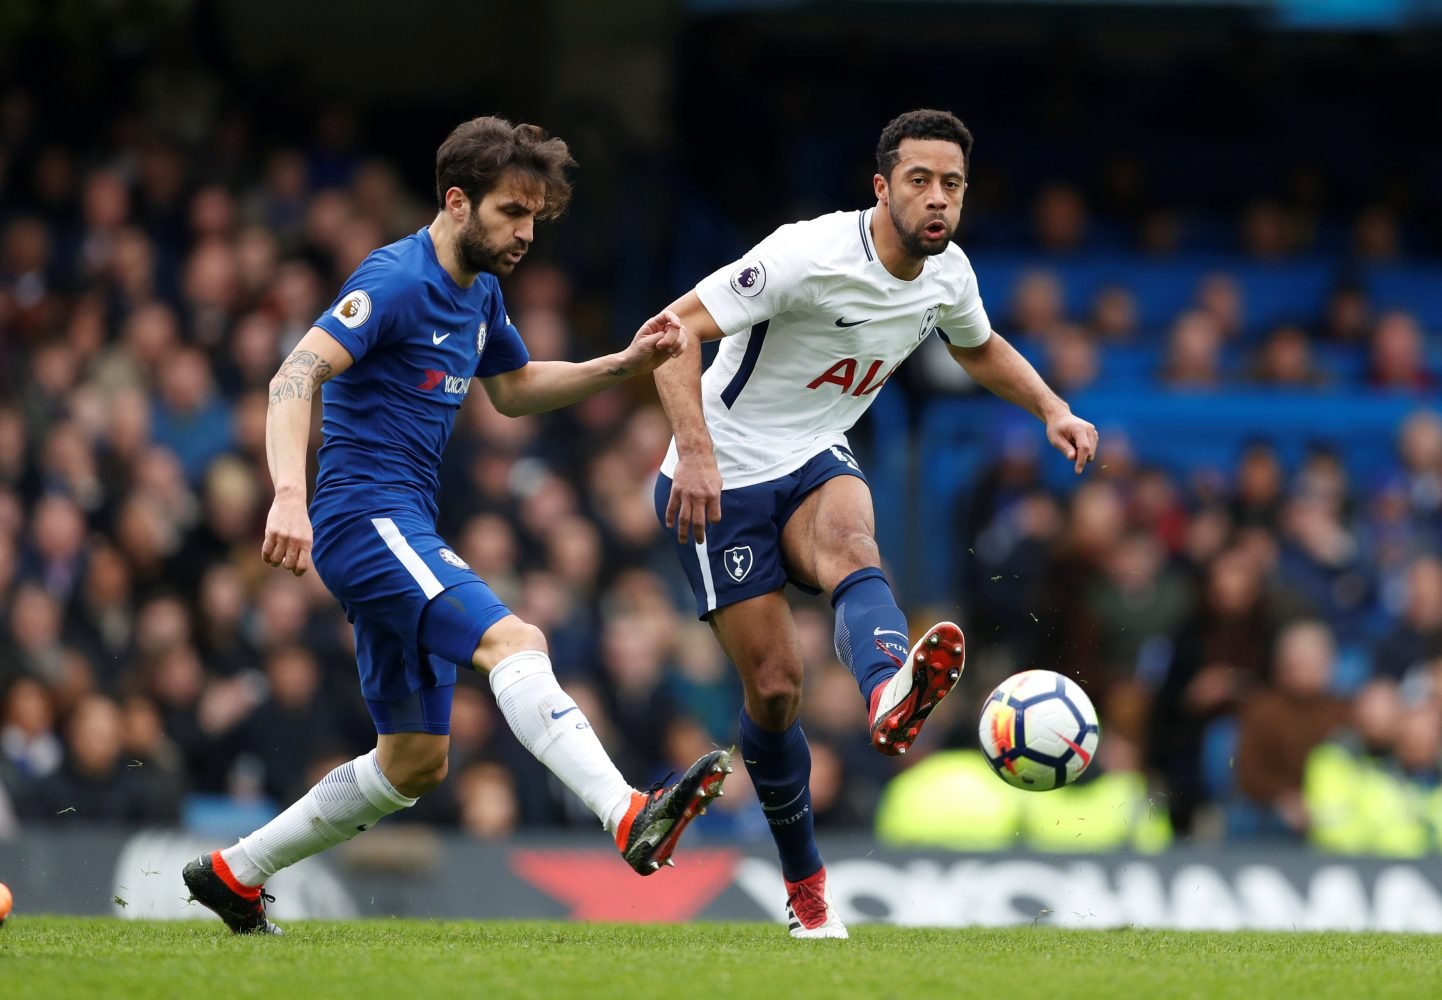 Tottenham have everything to lose says Fabregas